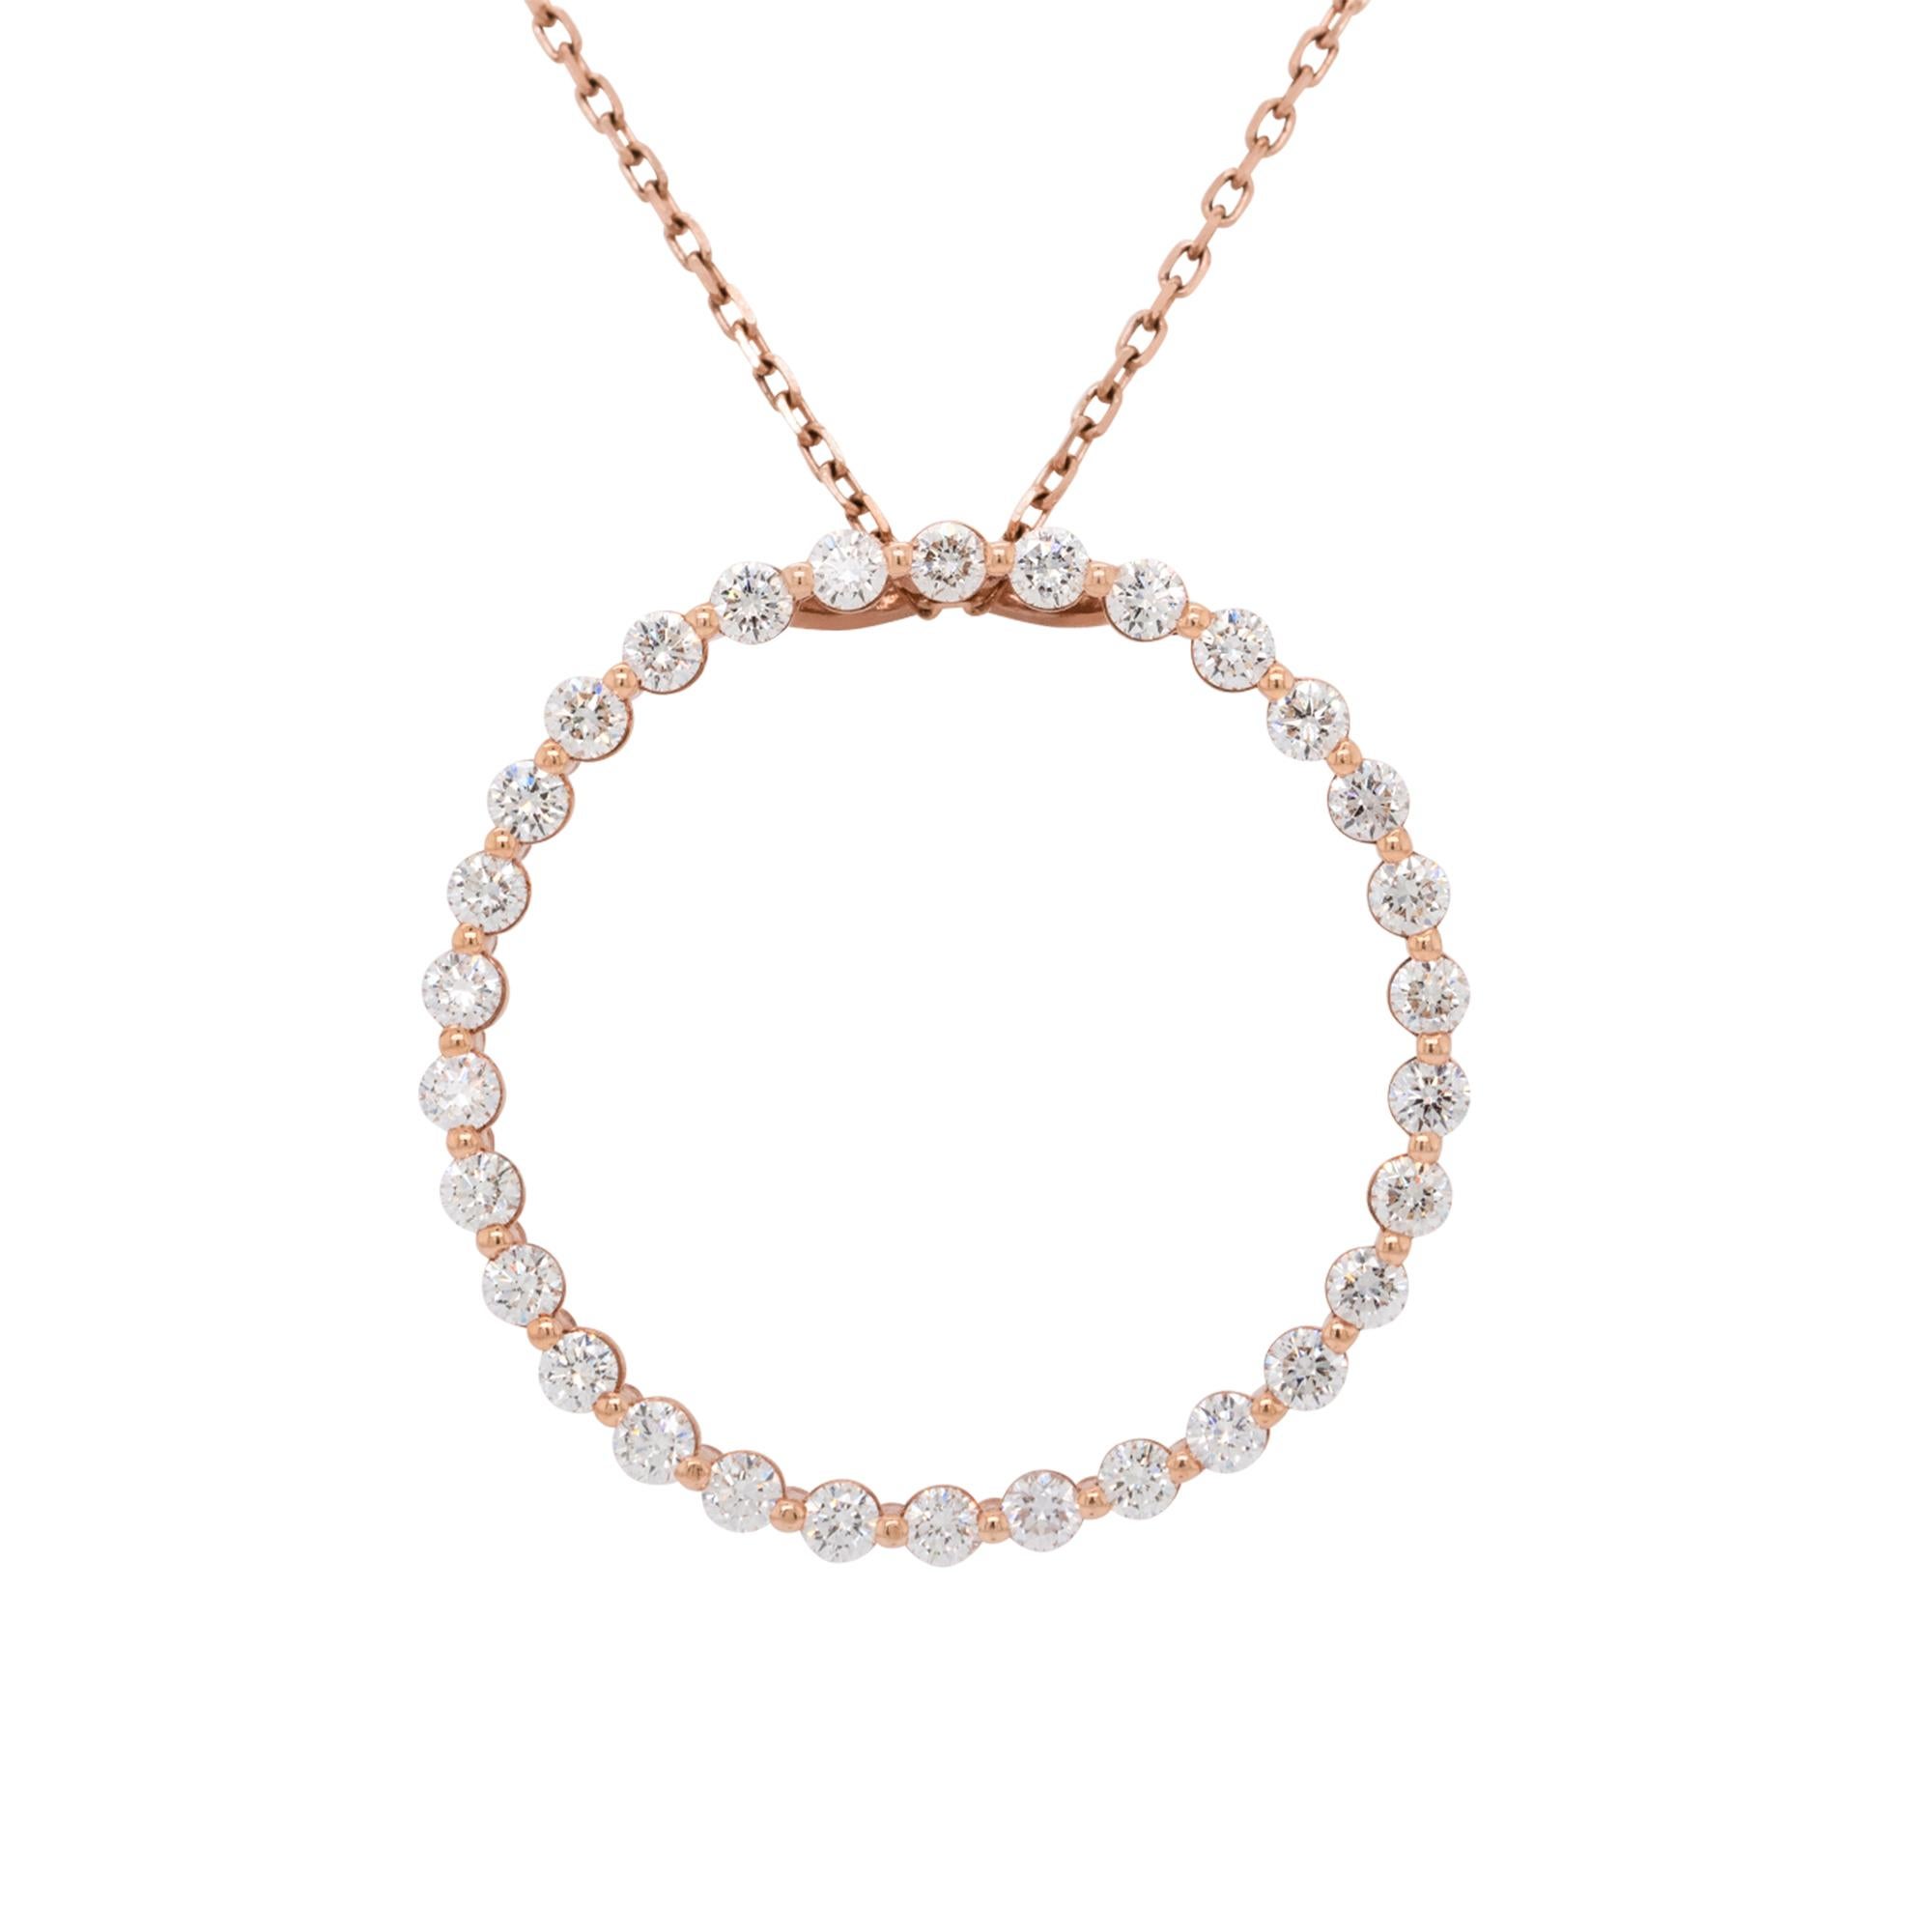 Material: 14k rose gold
Diamond Details: Approx. 1.50ctw of round cut Diamonds. Diamonds are G/H in color and VS in clarity
Length:1 6 inches long
Total Weight: 4.8g (3.1dwt) 
Pendant Measurements: 29.50mm x 29.50mm x 3.30mm
Additional details: Item